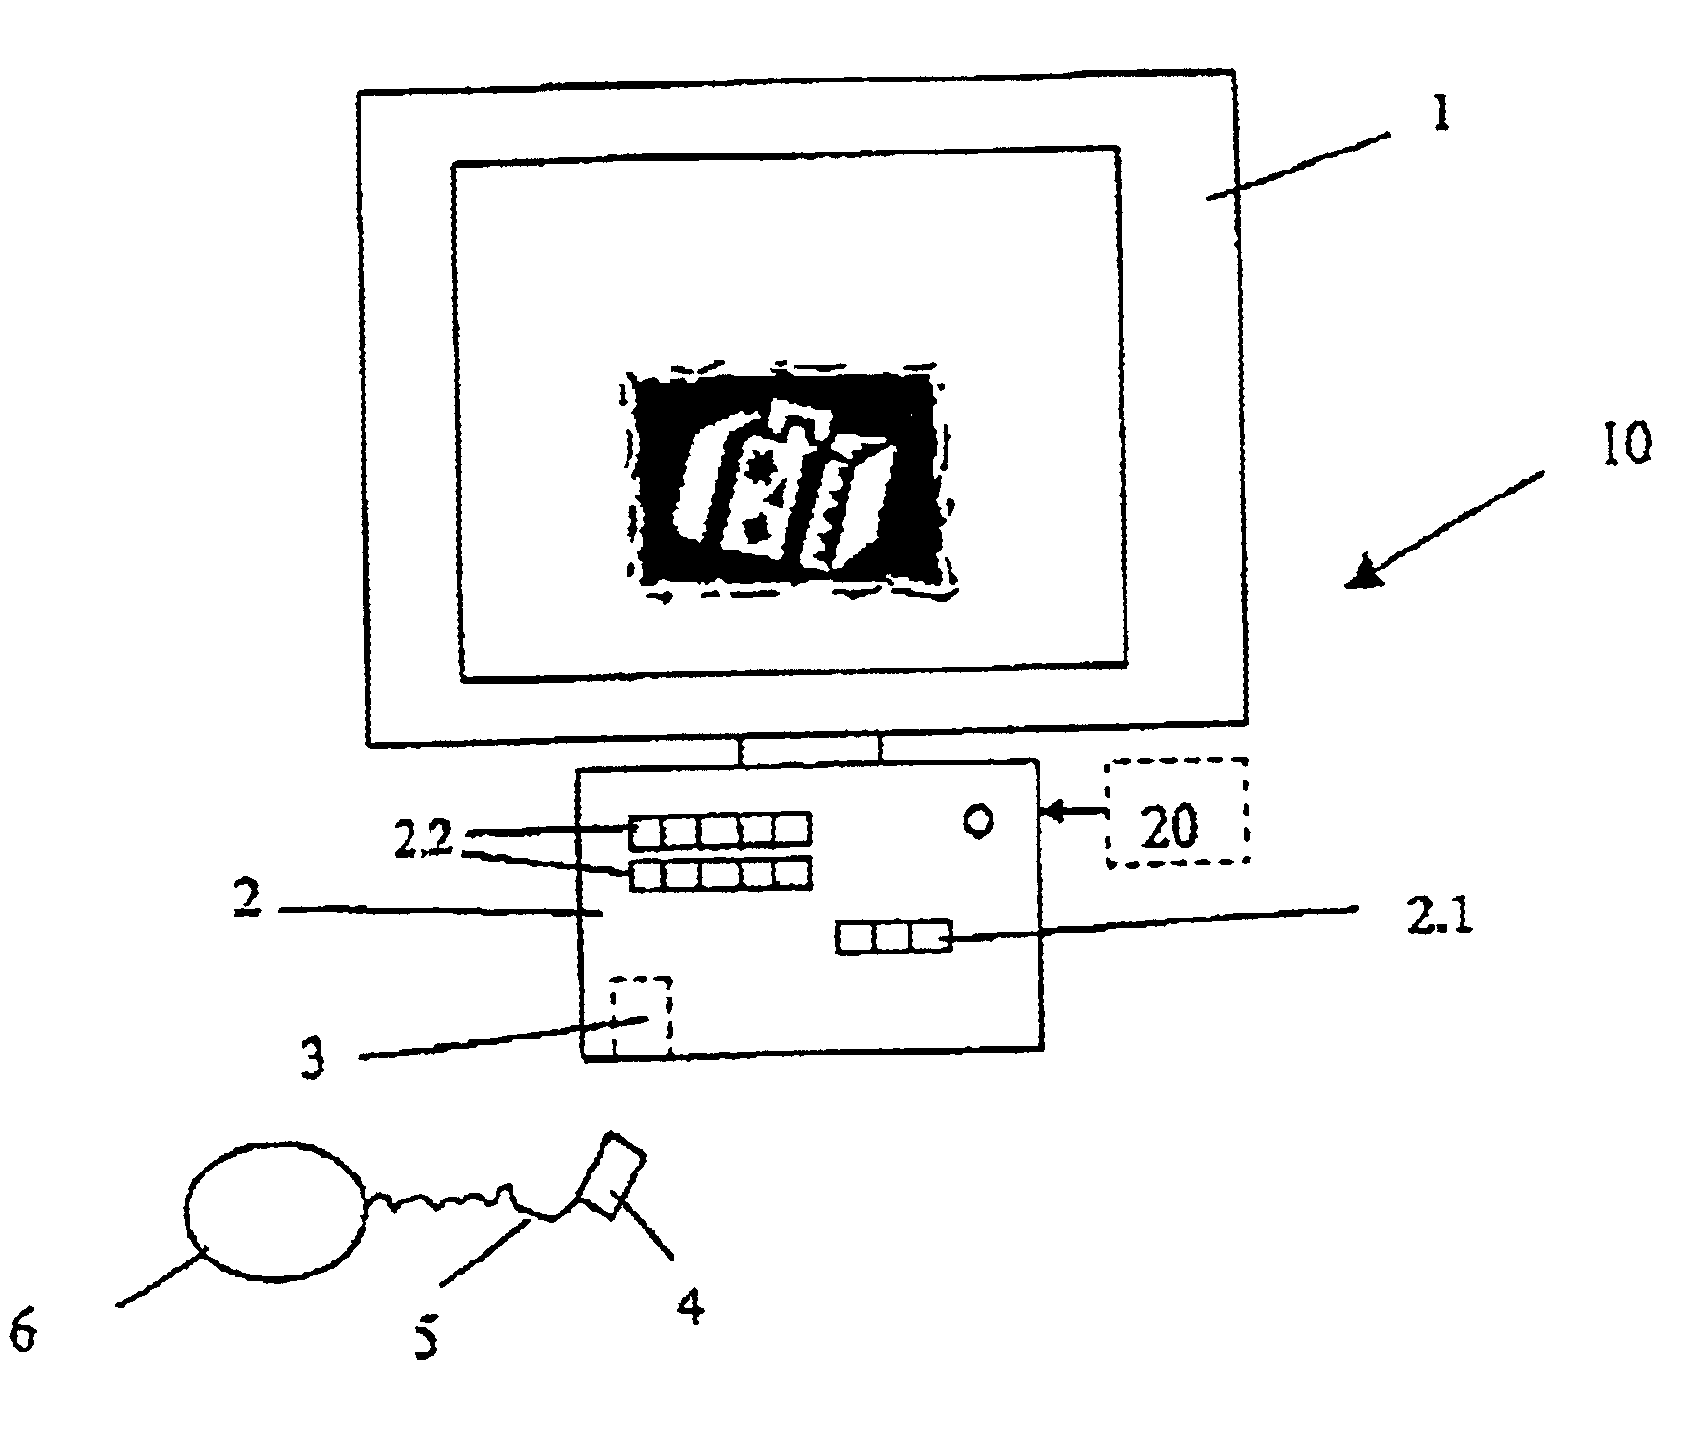 Service unit for an X-ray examining device